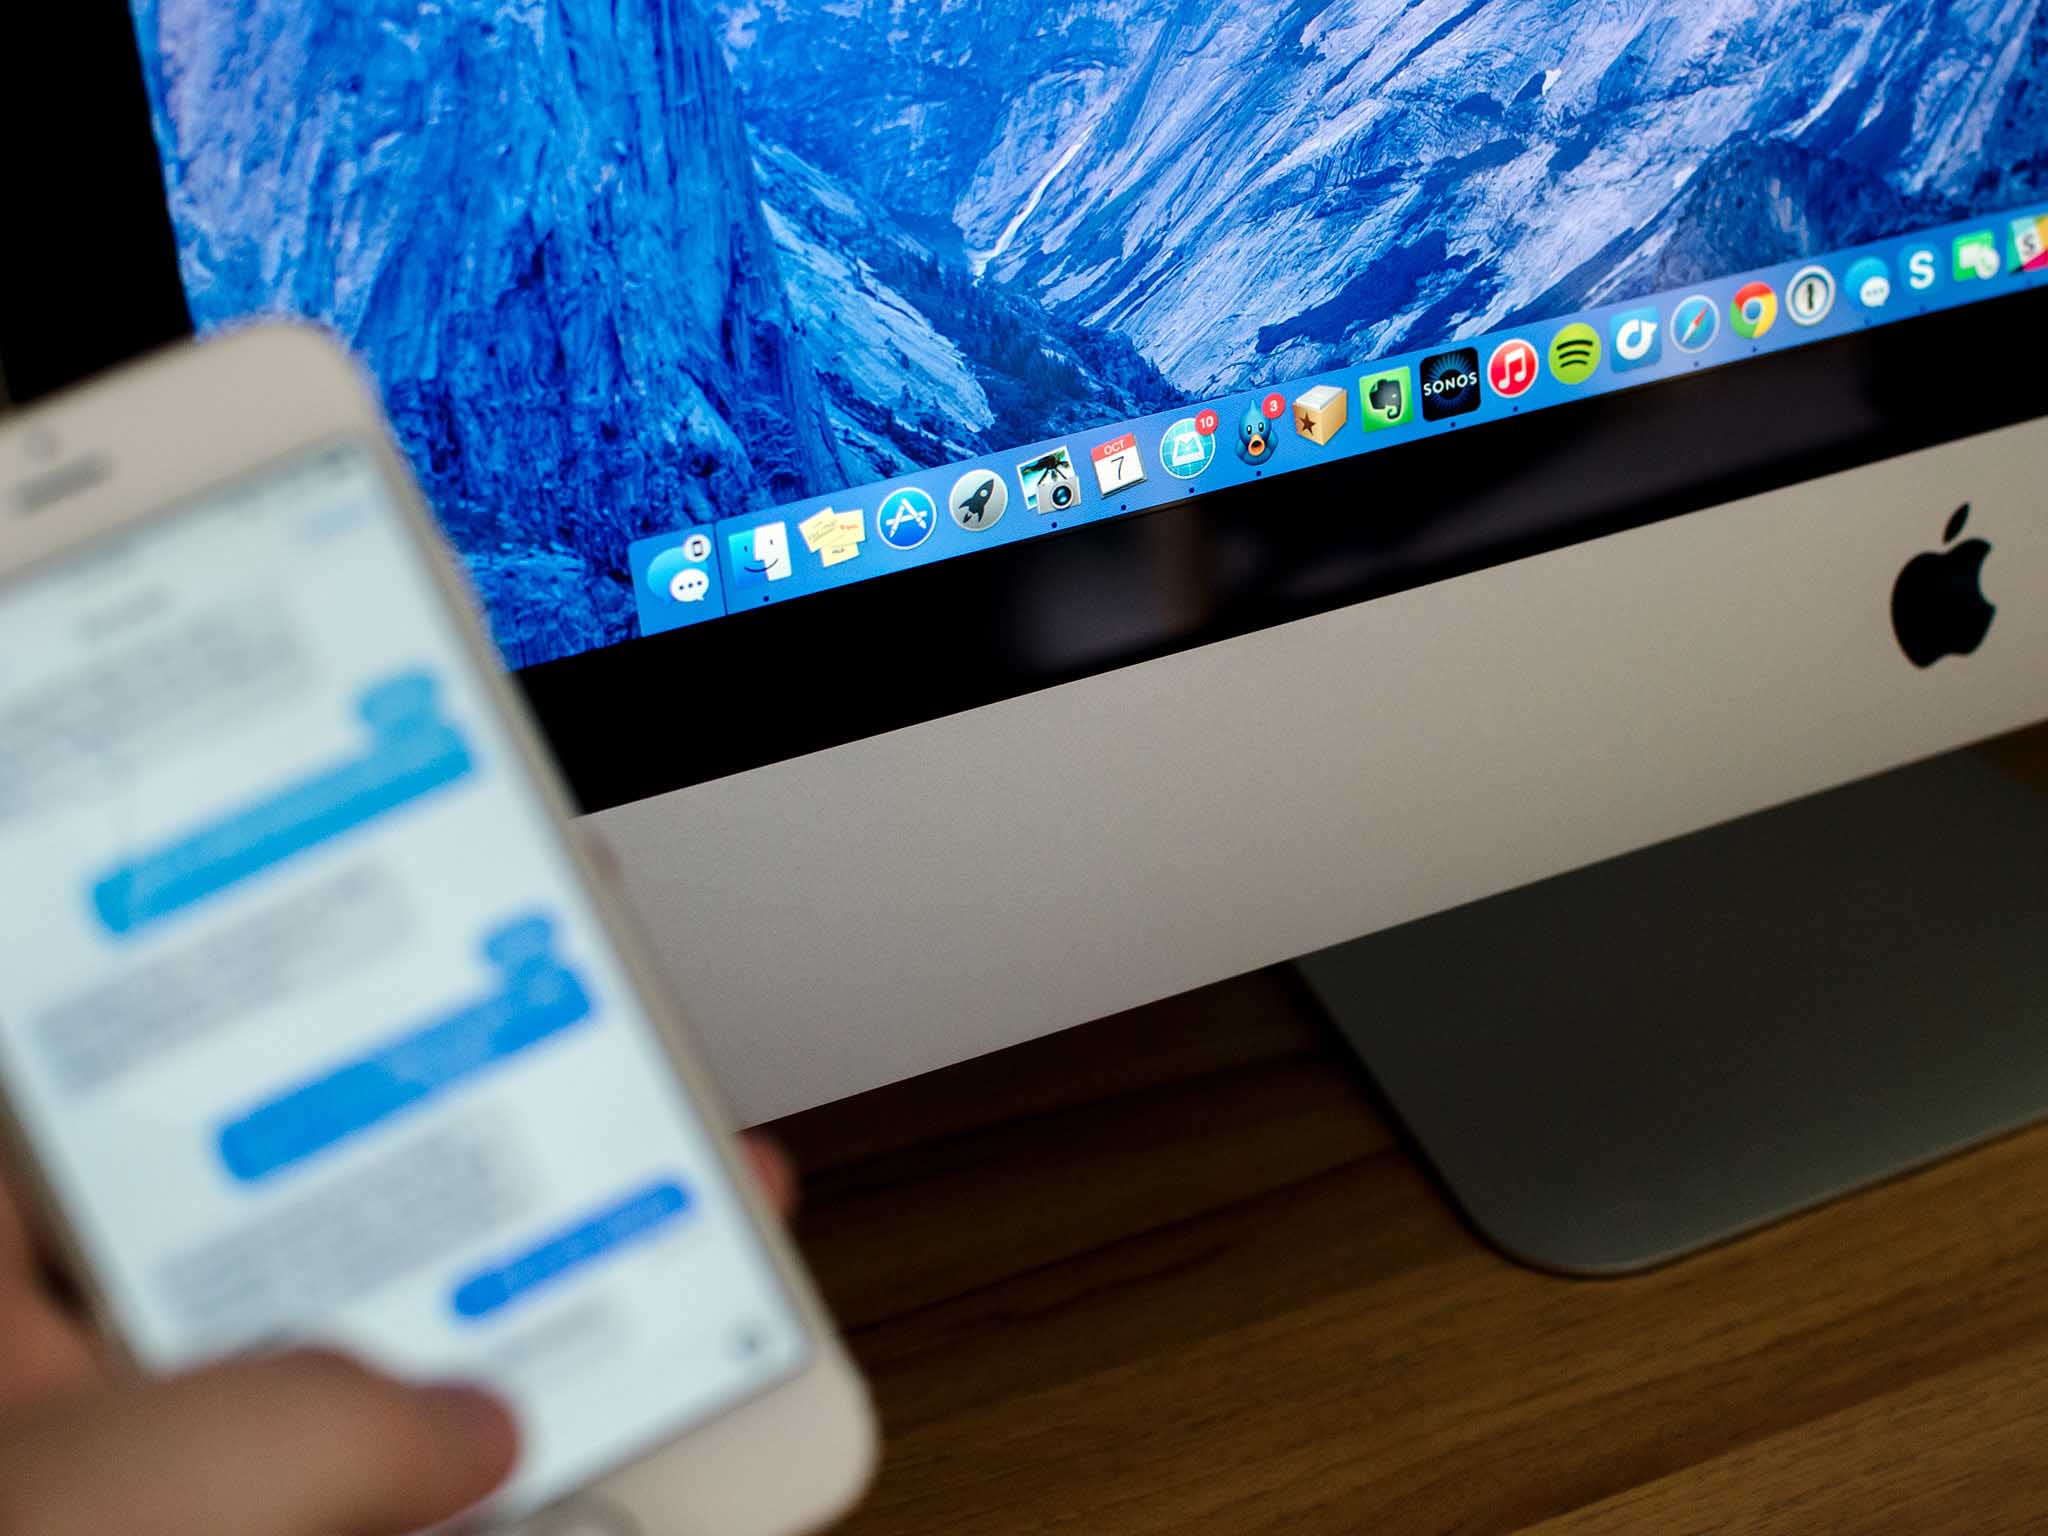 Yosemite's Continuity features: Handoff and the price of progress